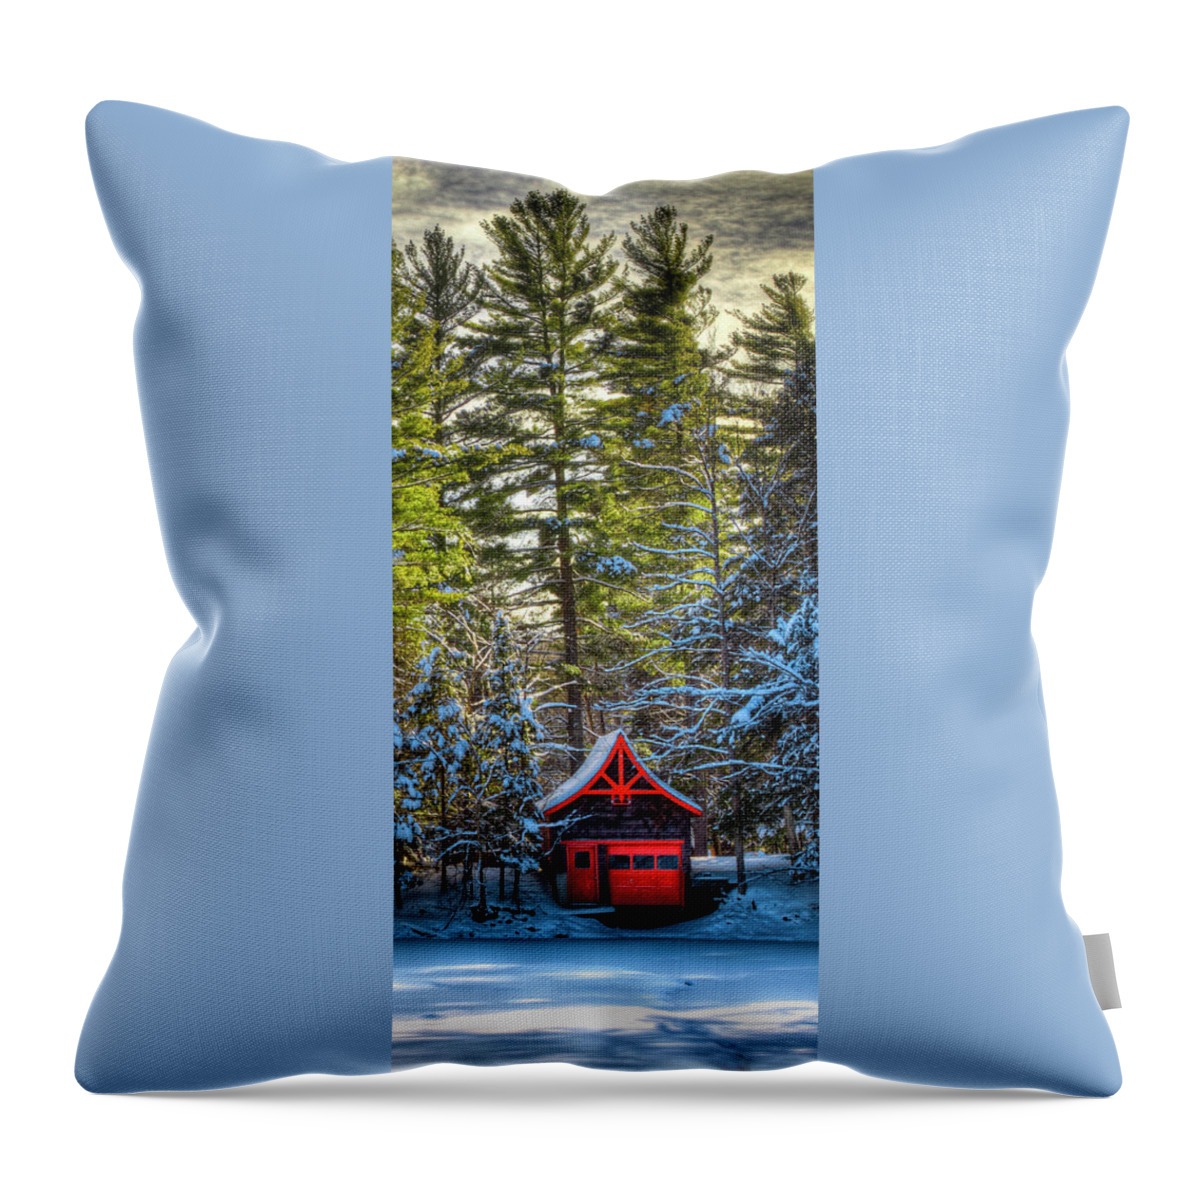 The Red Boathouse In Old Forge 2 Throw Pillow featuring the photograph The Red Boathouse in Old Forge 2 by David Patterson